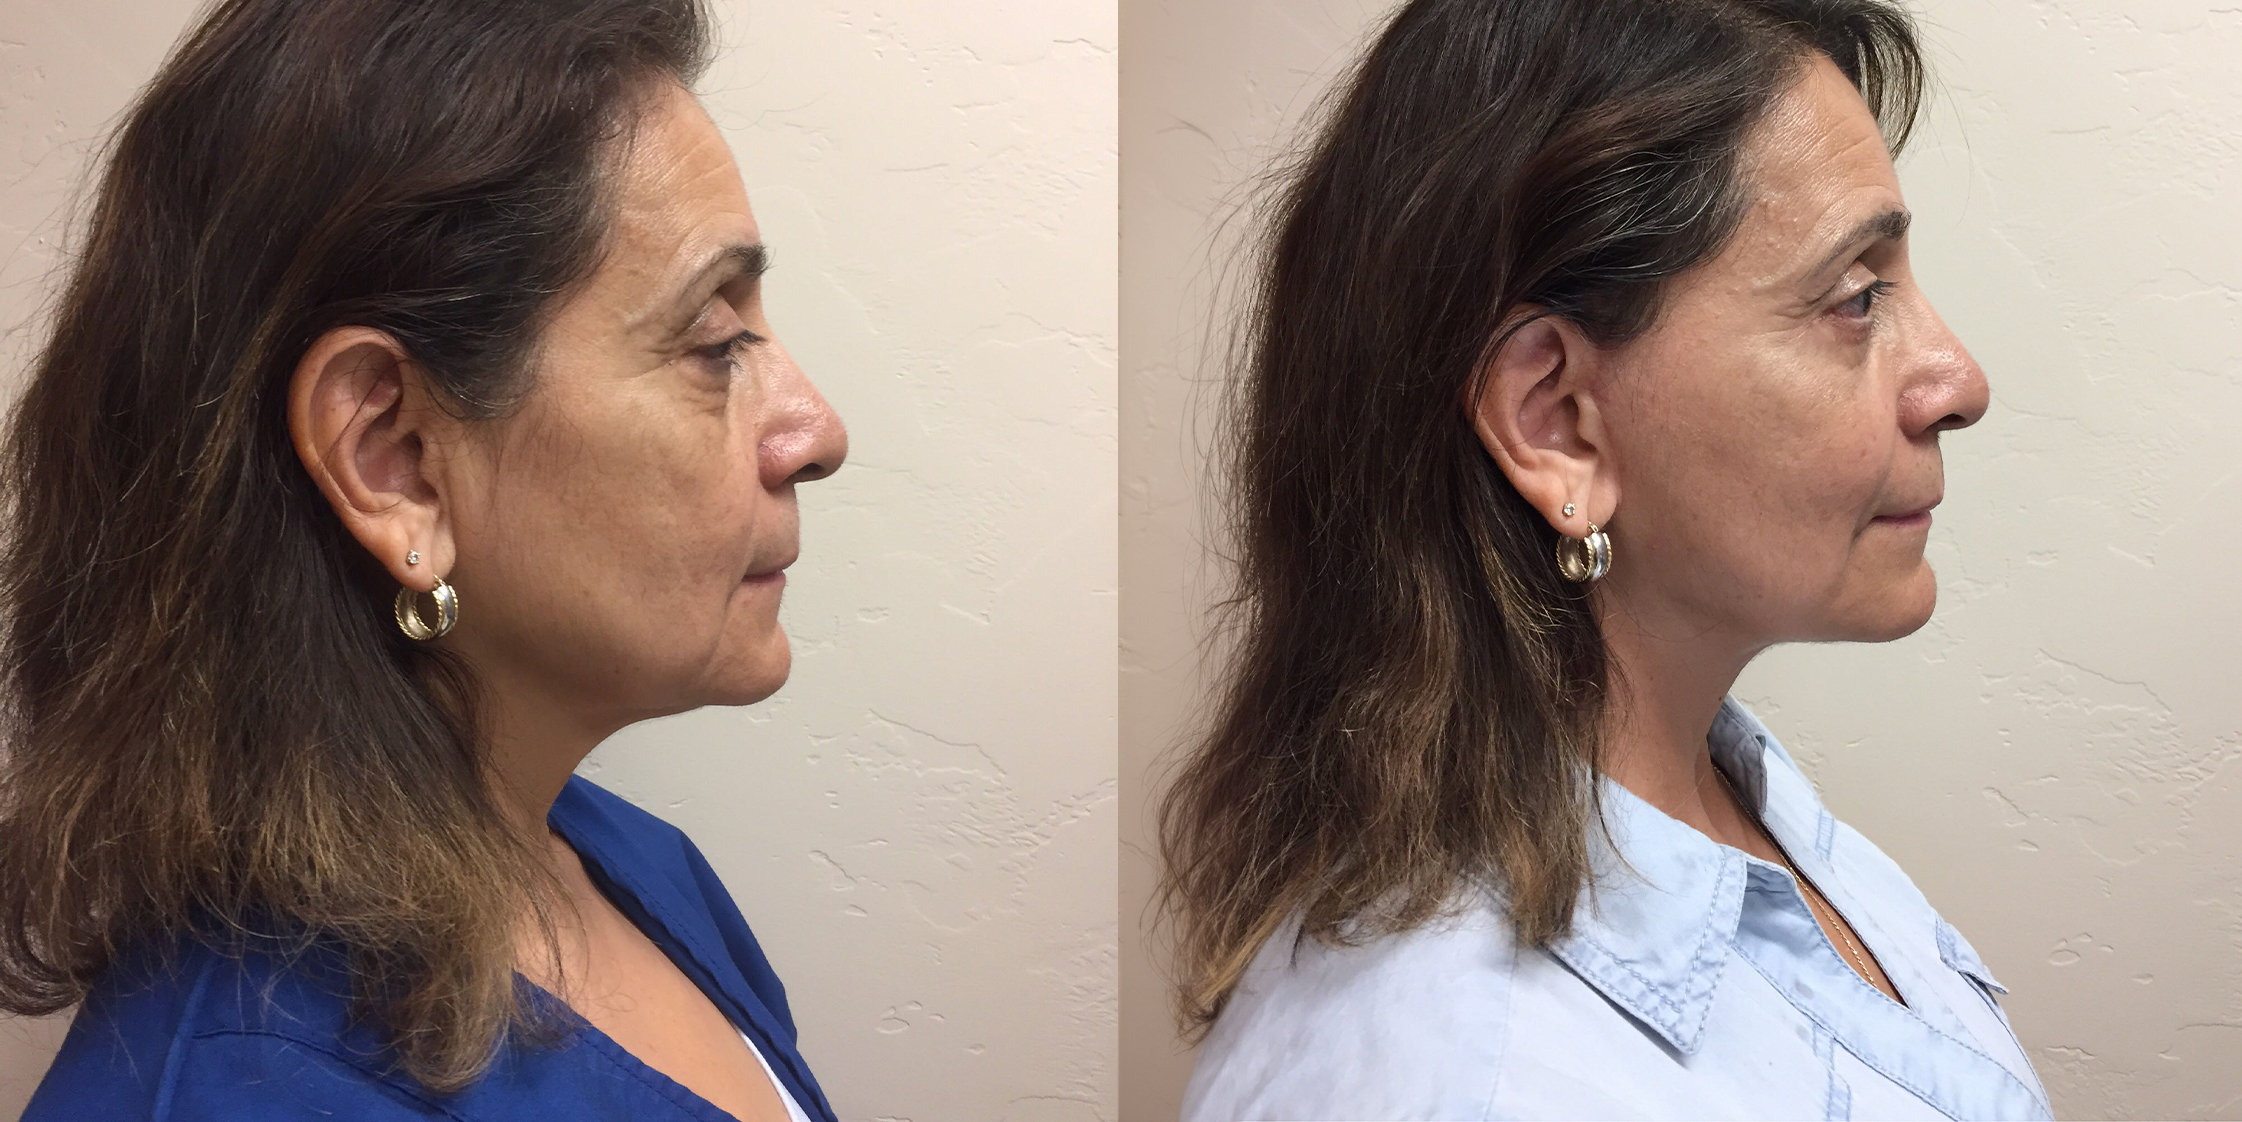 Hess-Sandeen-Facelift-Tucson-before-after6-1024x683